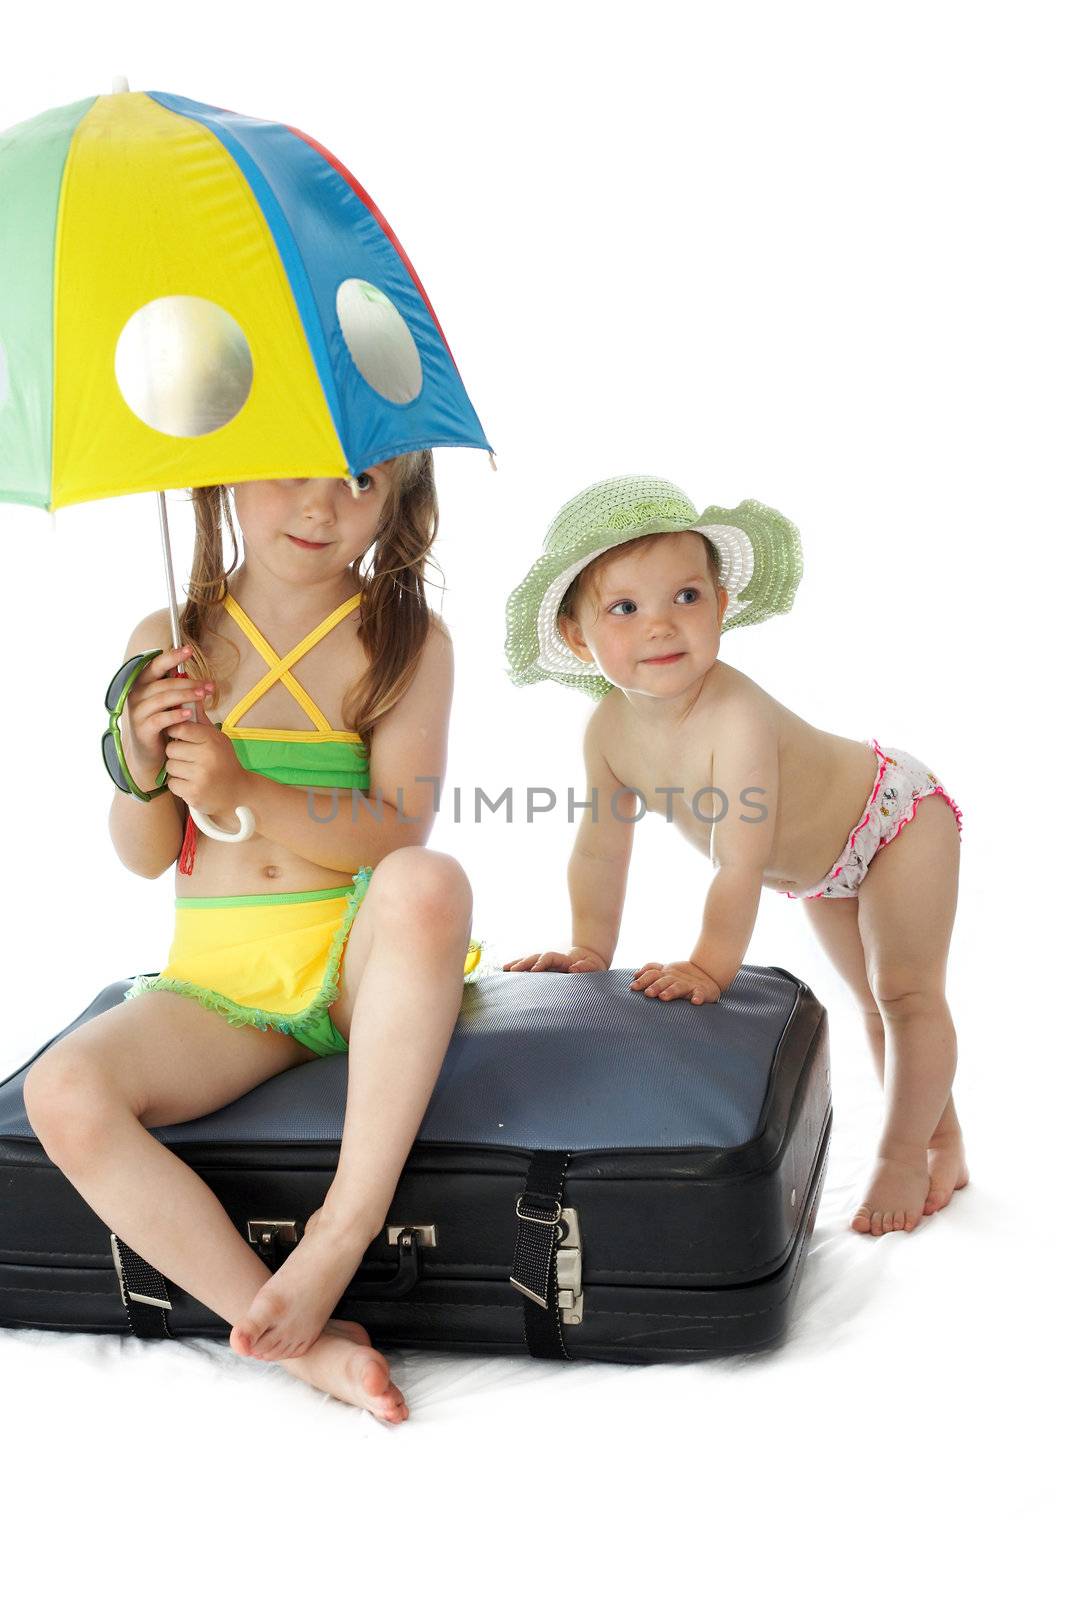 An image of two girls on a valise